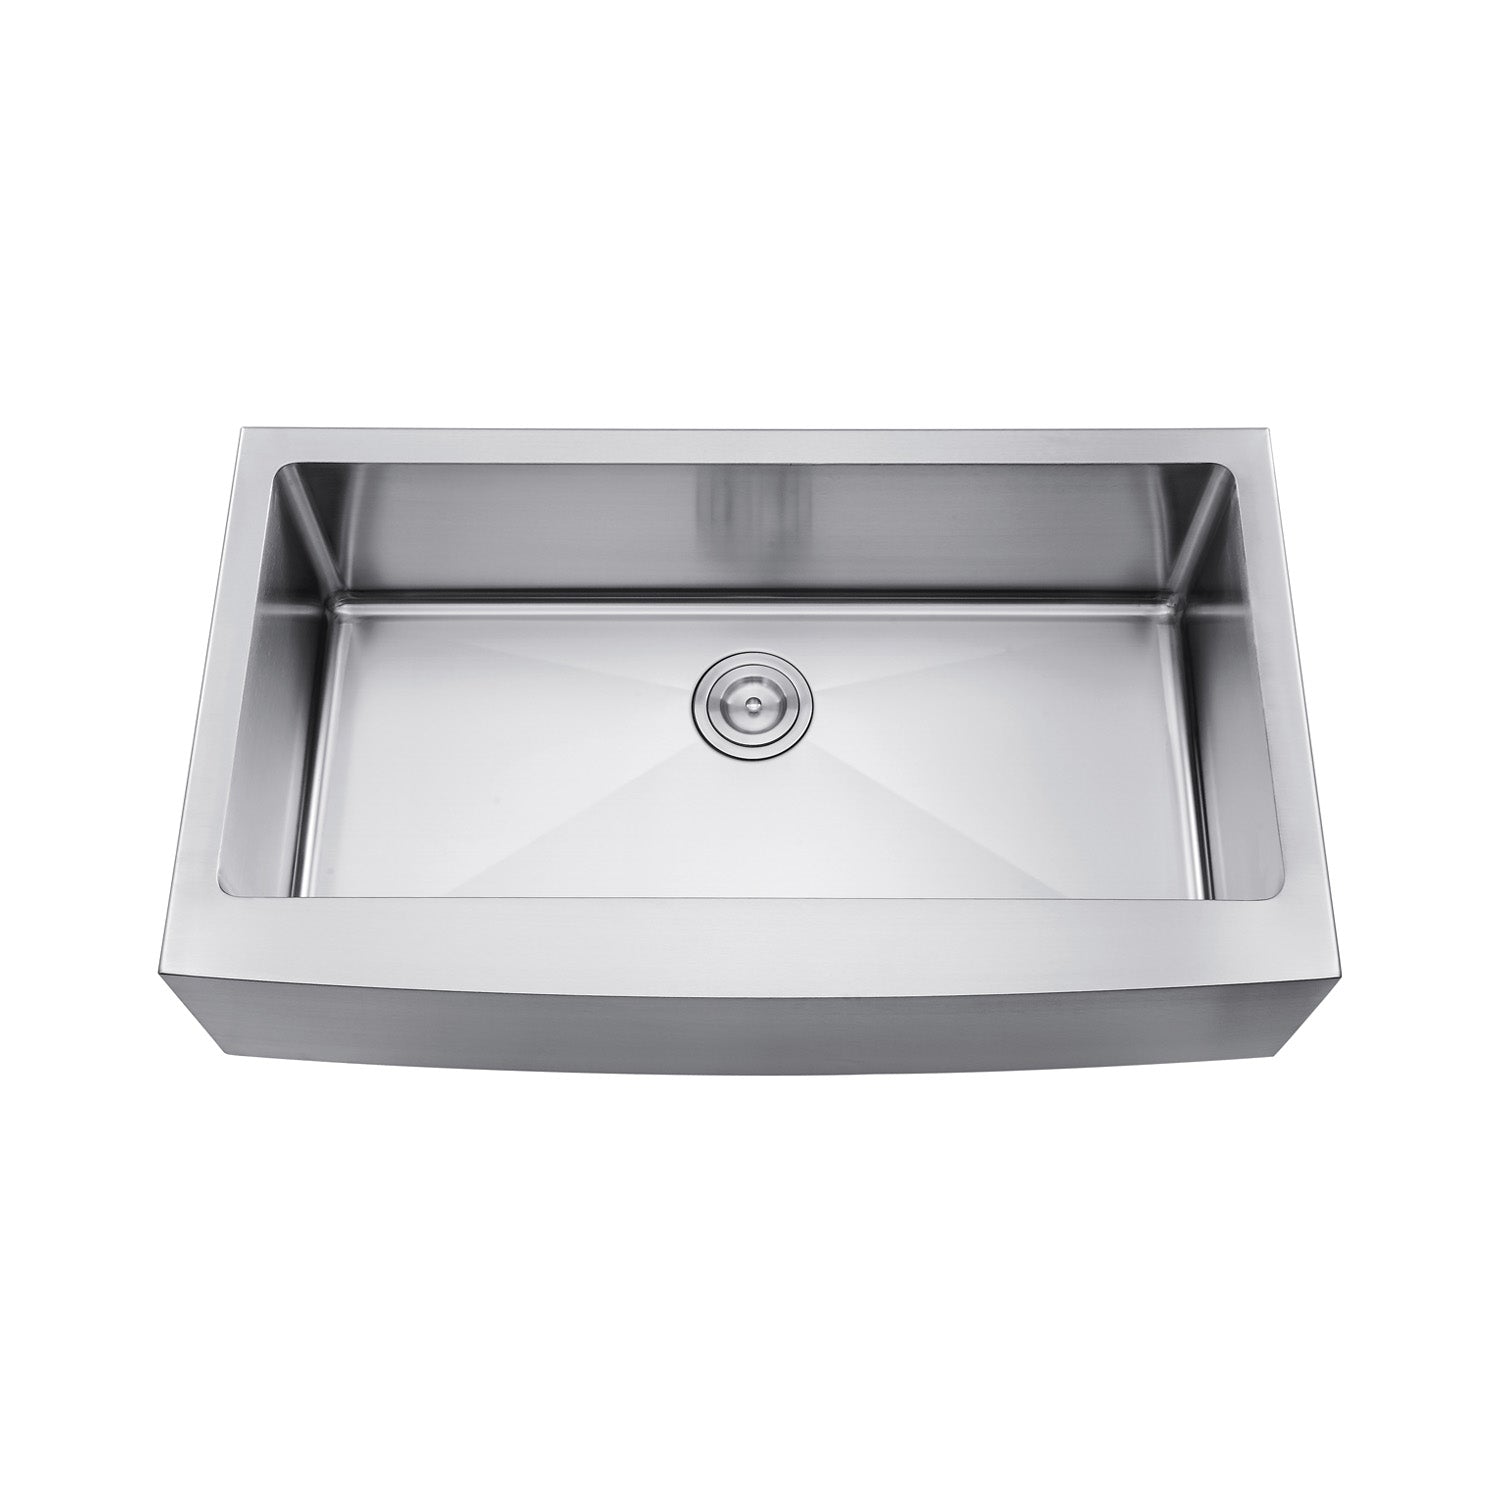 DAX Farmhouse Single Bowl Kitchen Sink, 18 Gauge Stainless Steel, Brushed Stainless Steel Finish, 36 x 21 x 10 Inches (DAX-3621R10)